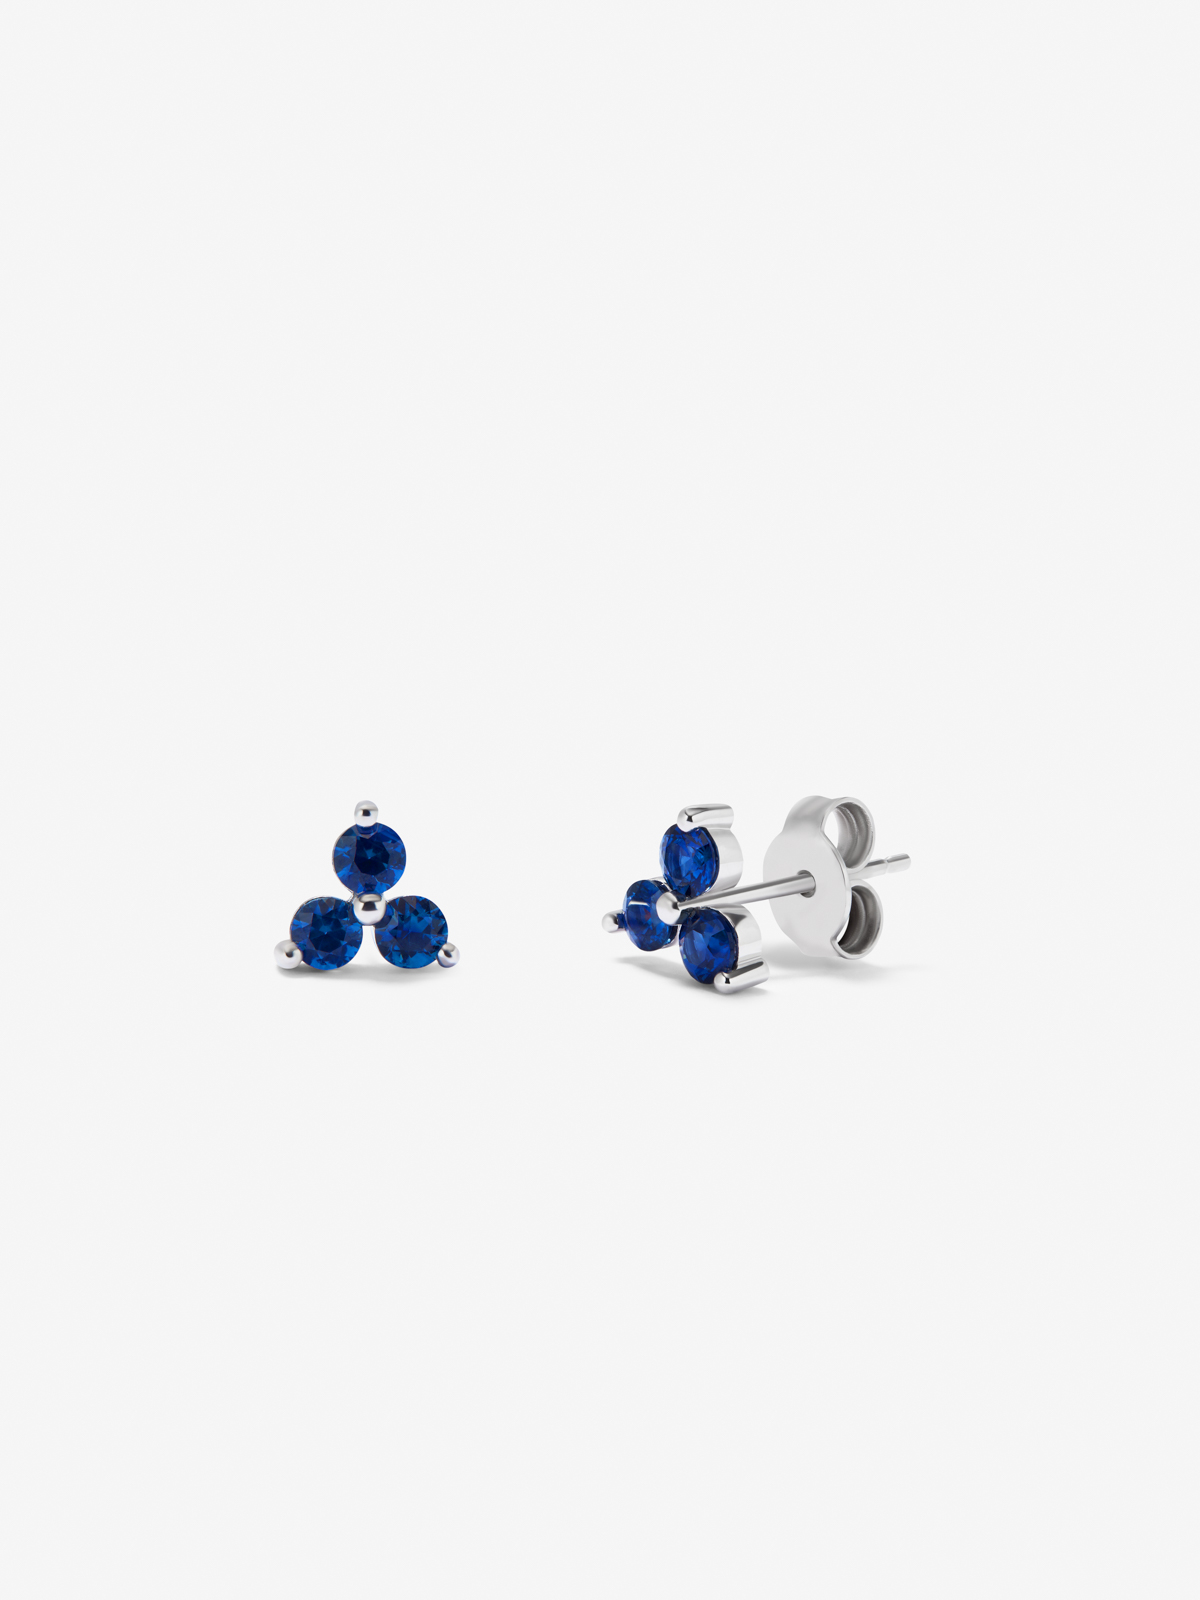 18k white gold earrings with blue sapphires in a brilliant size of 0.77 cts